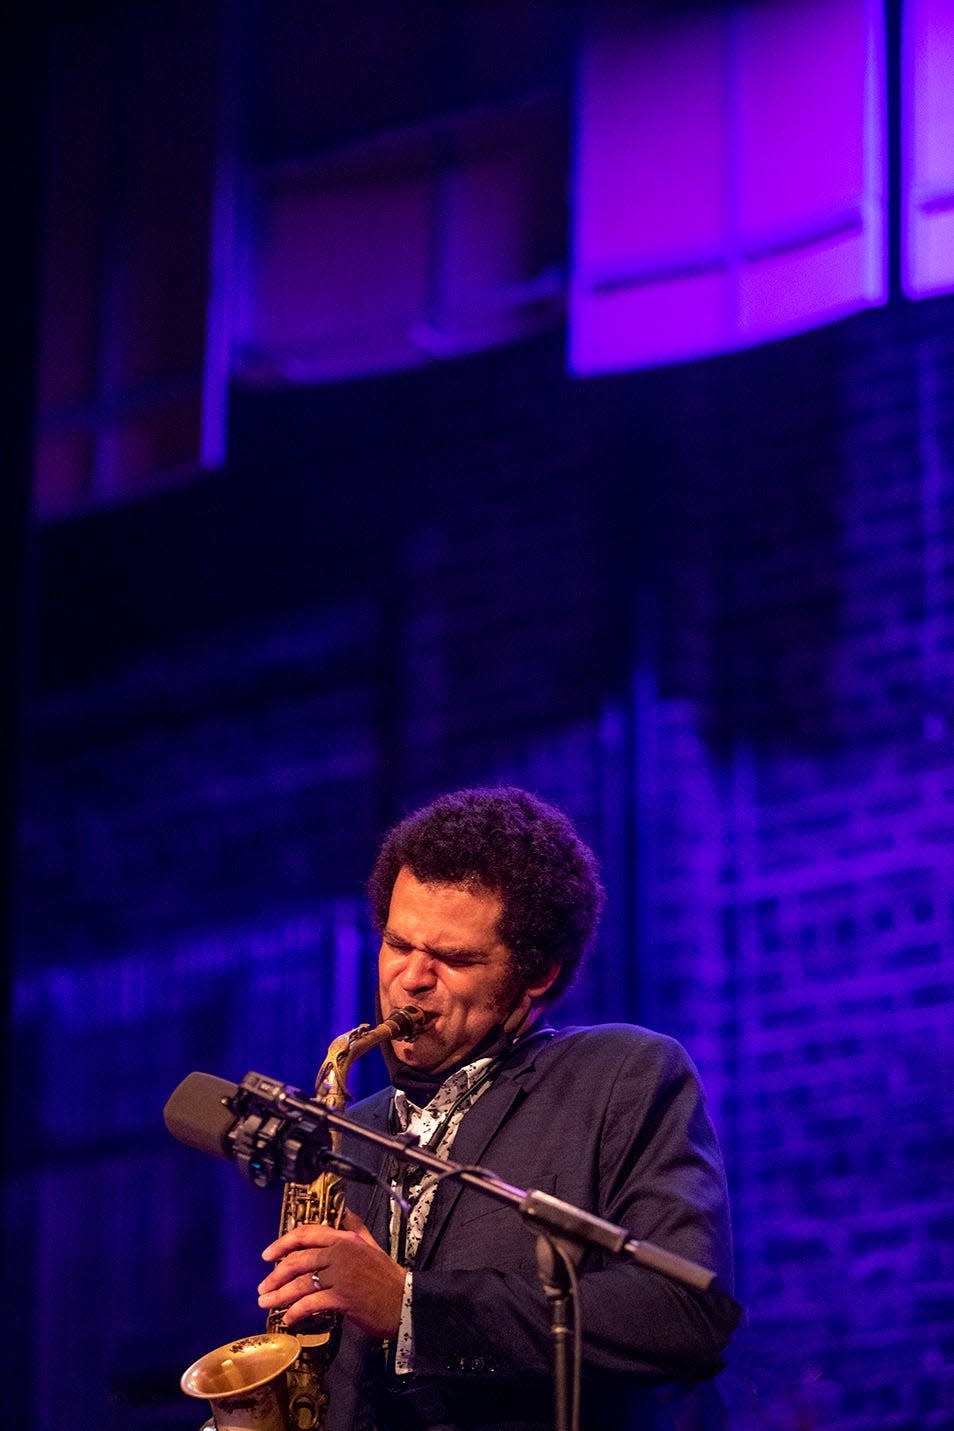 Saxophonist and composer Greg Ward of Chicago performs with his band, Rogue Parade, at the Rootabaga Jazz Festival on Saturday, April 17, 2021 at the Orpheum Theatre.